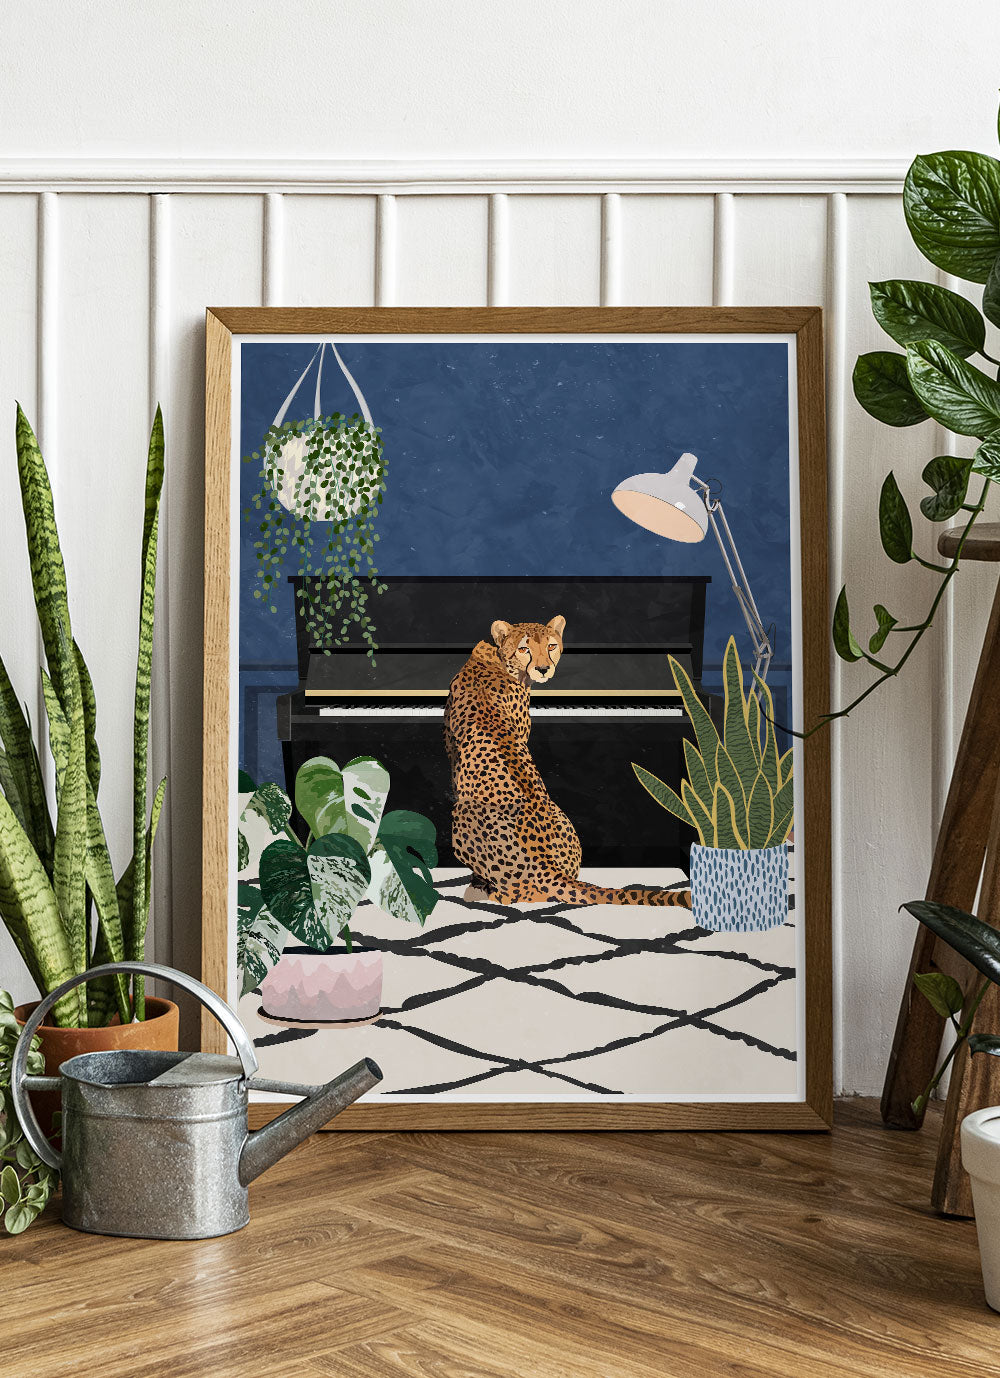 Cheetah Tunes Art Print by Sarah Manovski in a funky interior space with house plants and a watering can